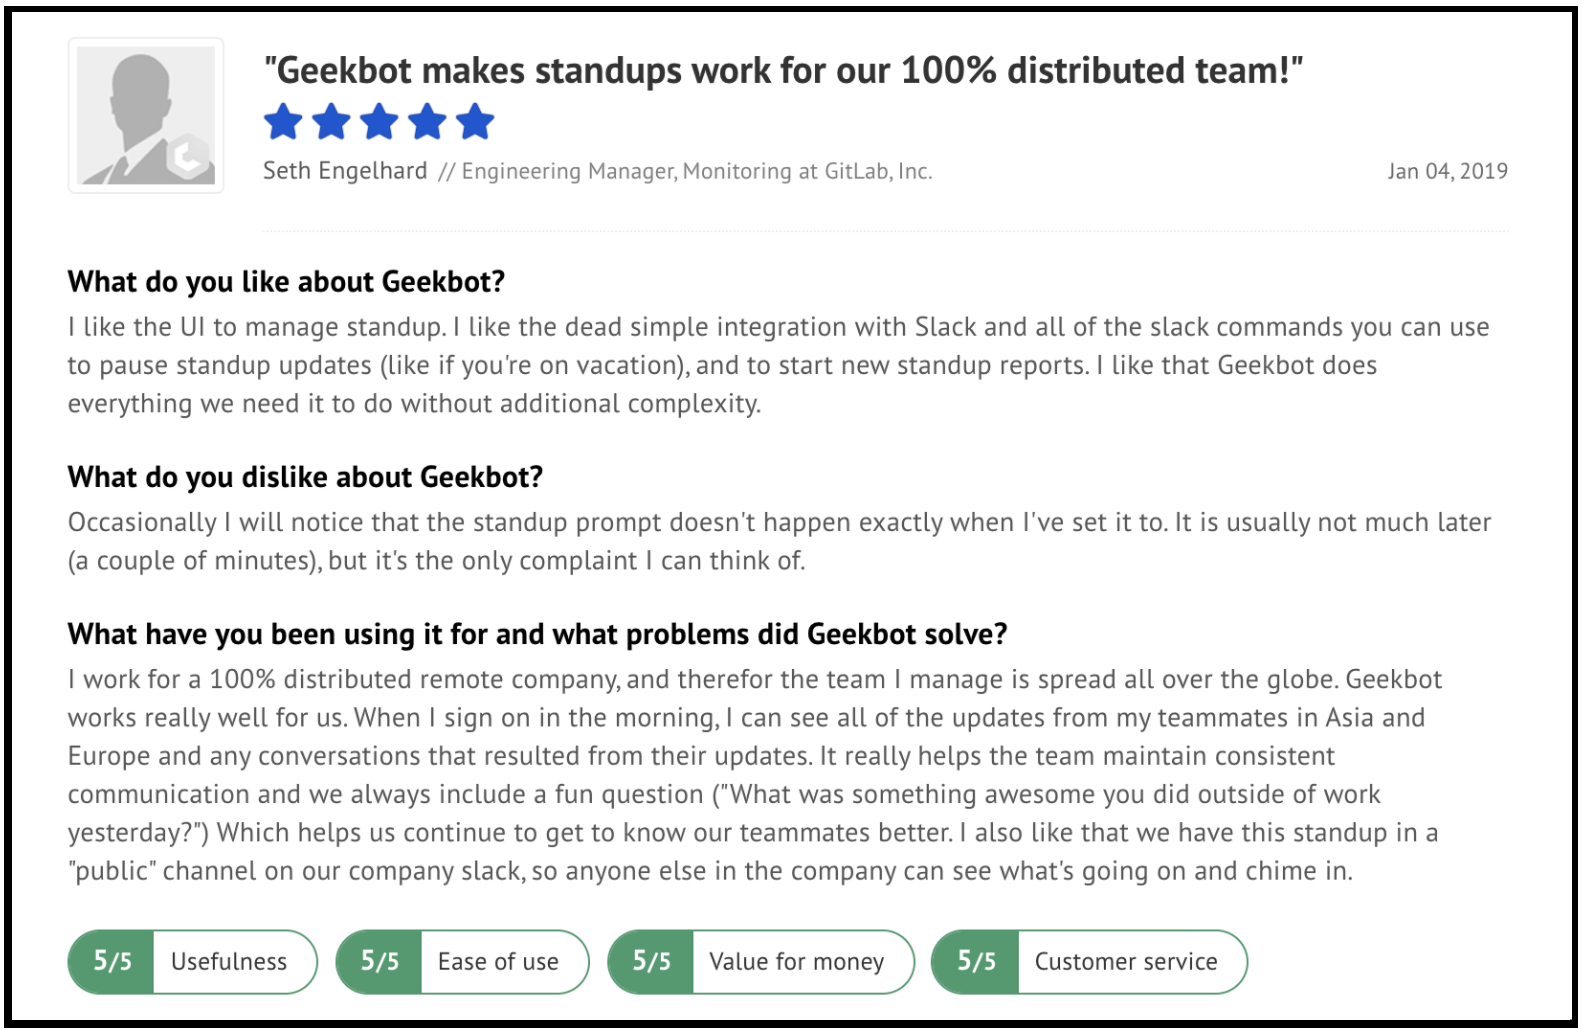 "Geekbot makes standups work for our 100% distributed team!"